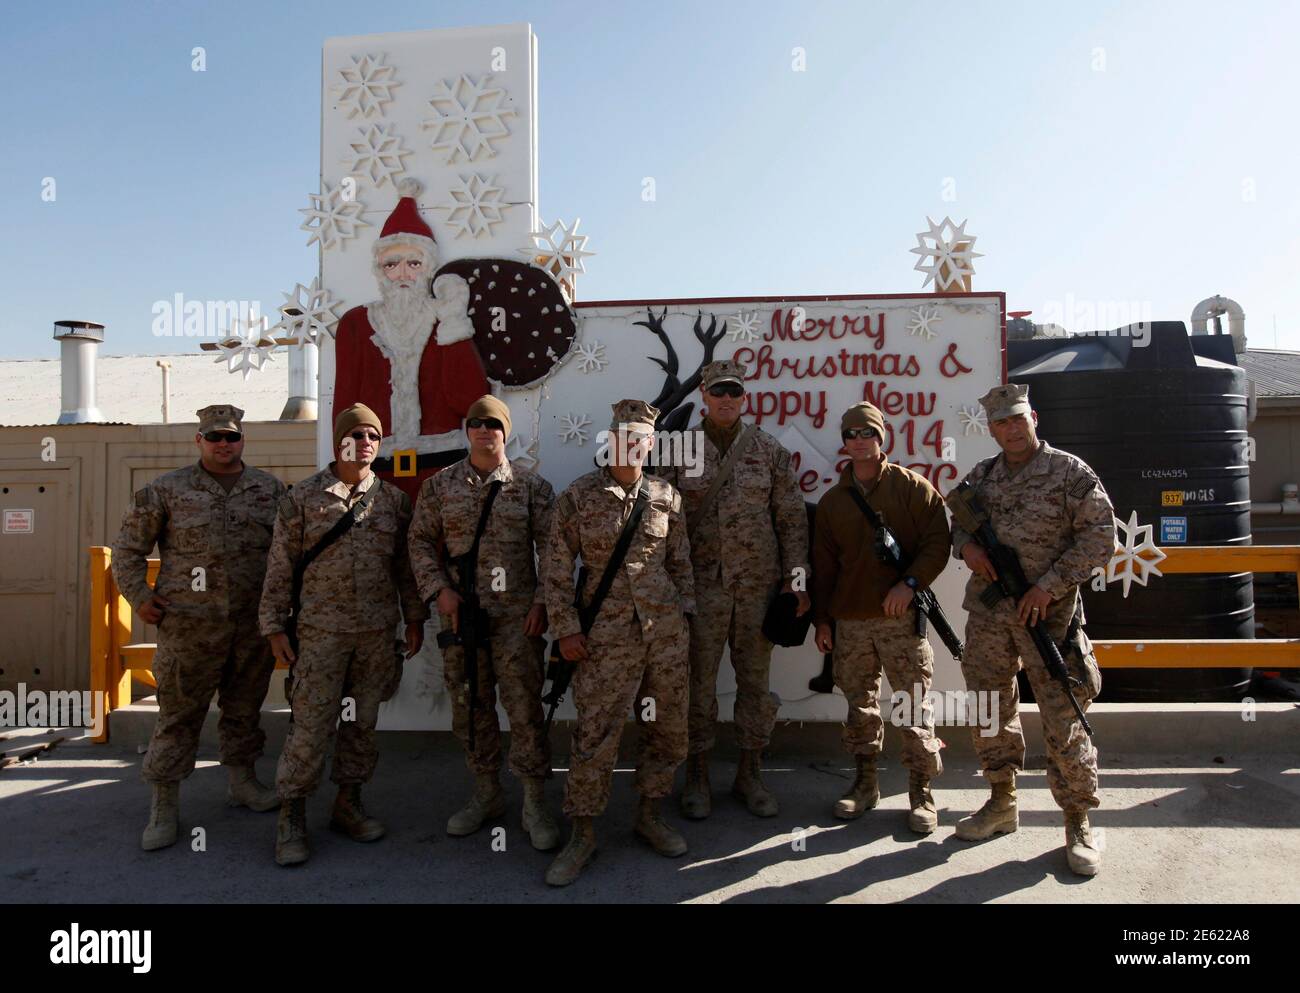 NATO troops from the International Security Assistance Force (ISAF) take pictures during Christmas celebrations at Bagram Airfield, north of Kabul, December 25, 2013. REUTERS/Mohammad Ismail (AFGHANISTAN - Tags: MILITARY SOCIETY) Stock Photo